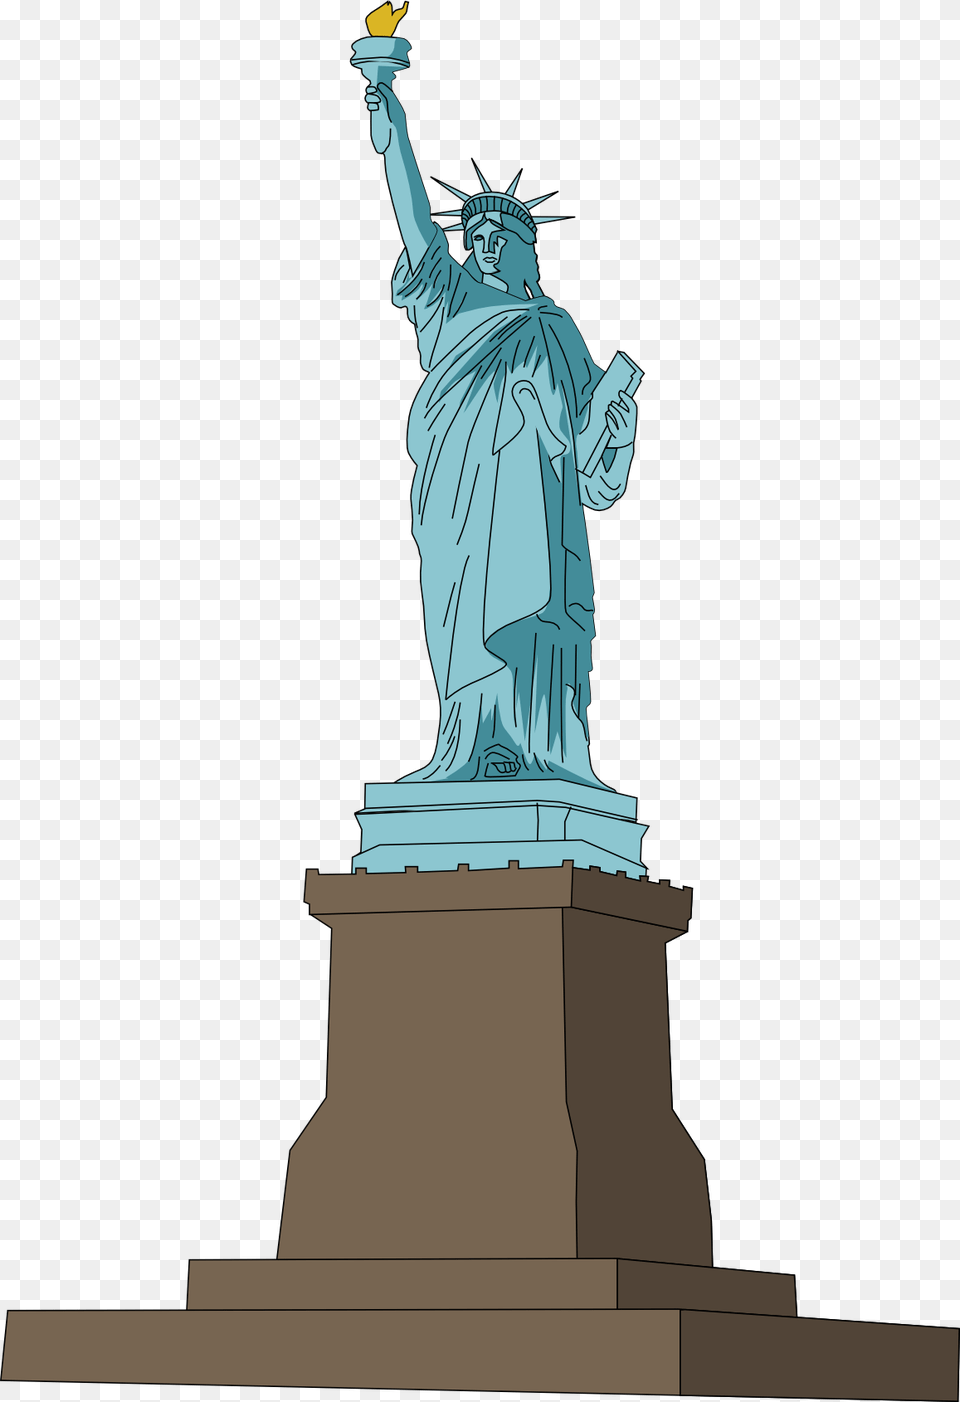 To Use Public Domain Monuments Clip Art Statue Of Liberty, Person, Sculpture, Landmark, Statue Of Liberty Png Image